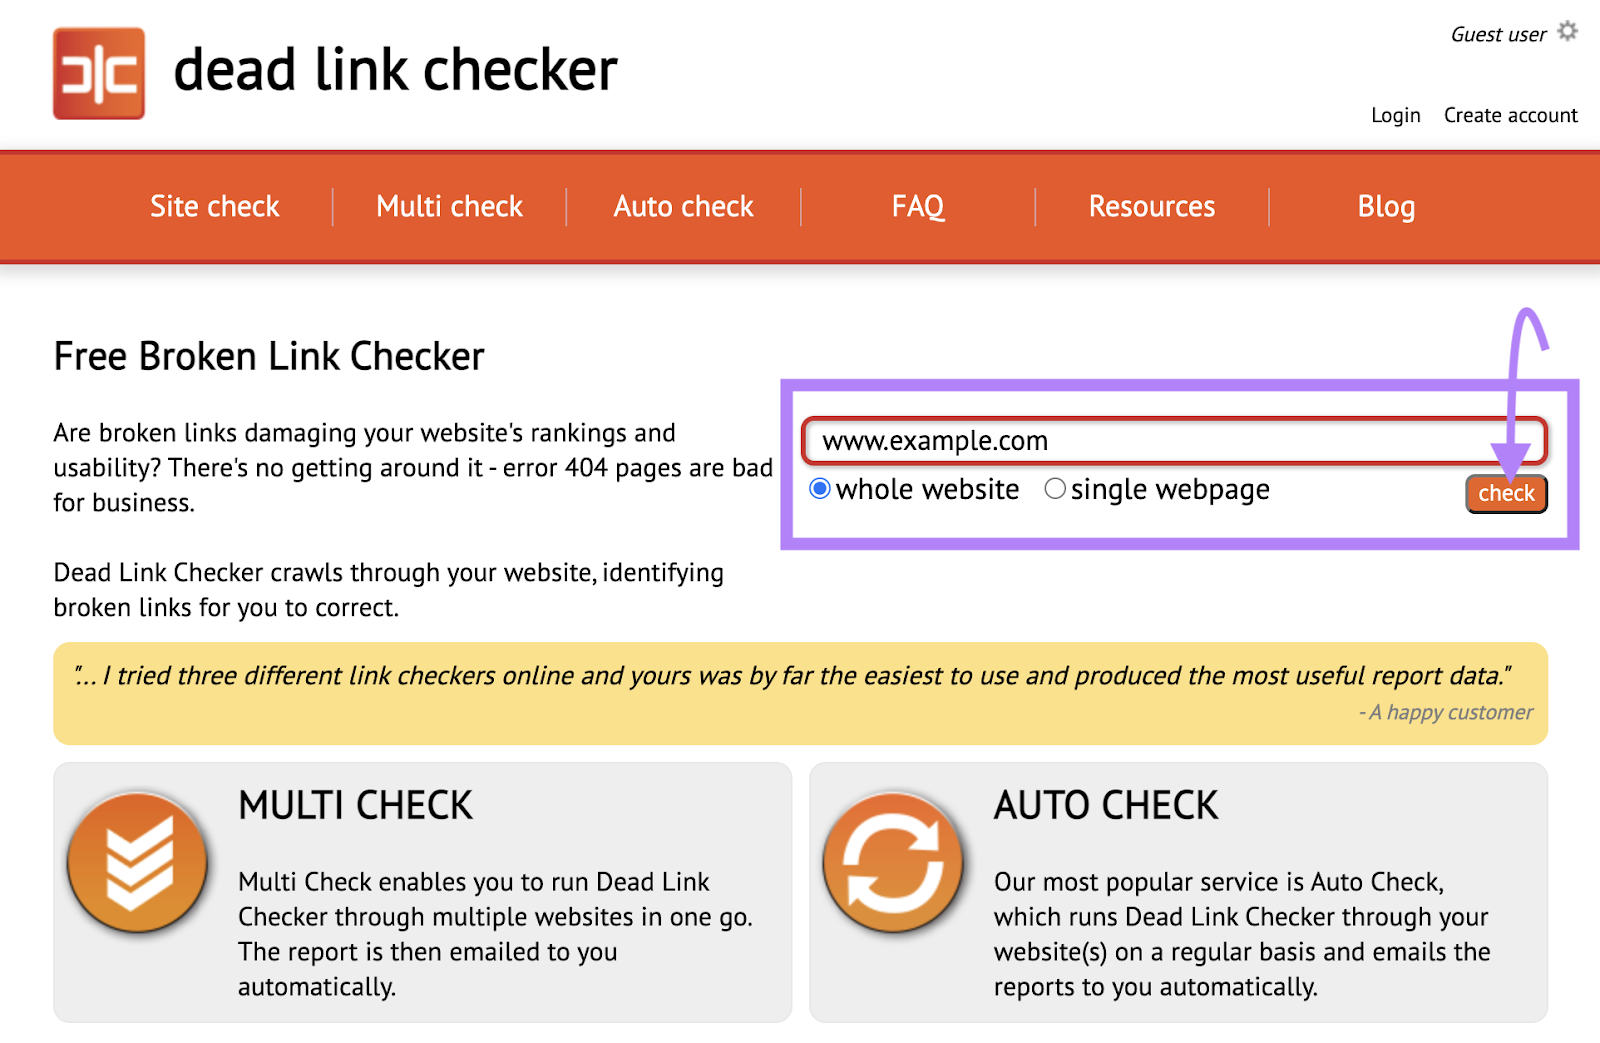 Add your website domain to the Dead Link Checker tool